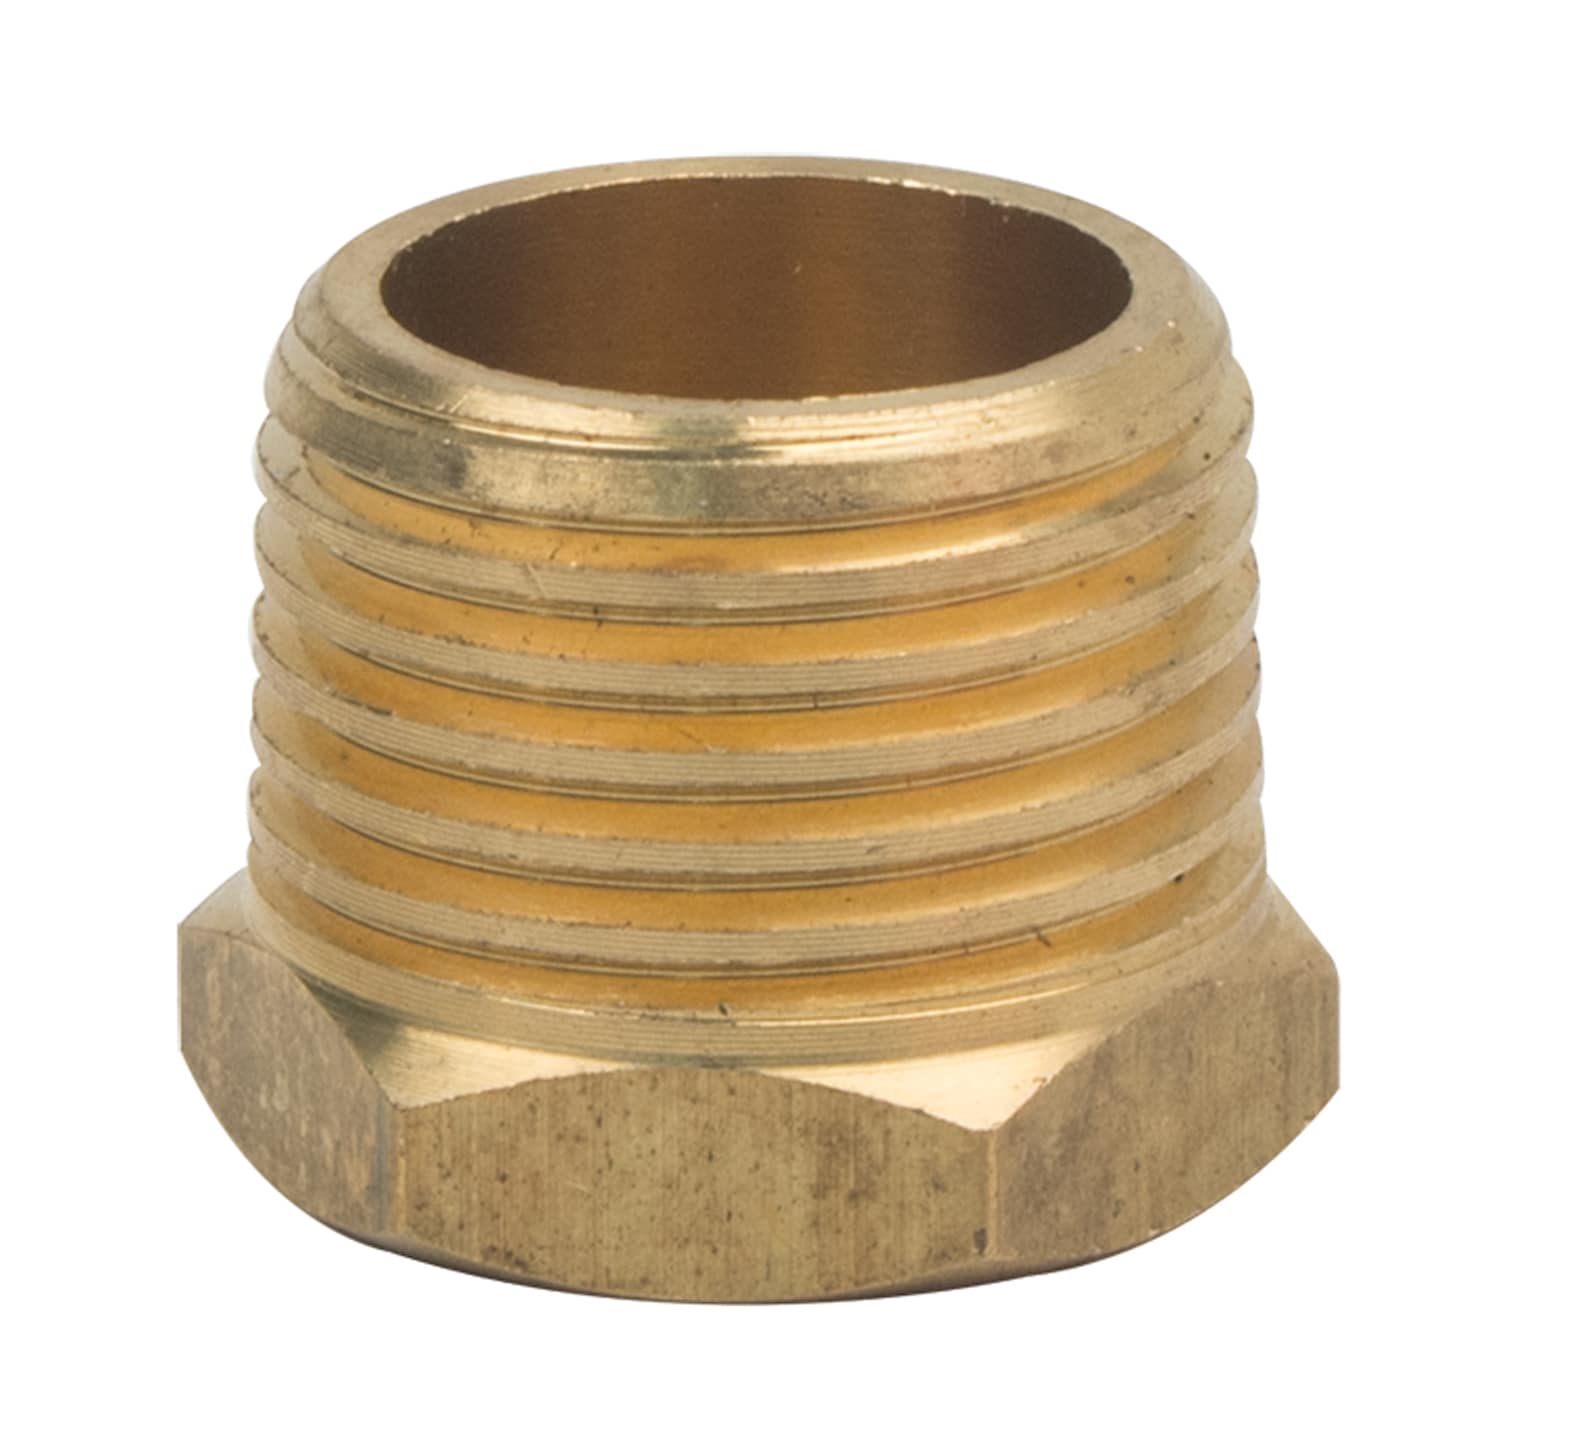 1/2 in. x 3/8 in. FIP Brass Reducing Coupling Fitting